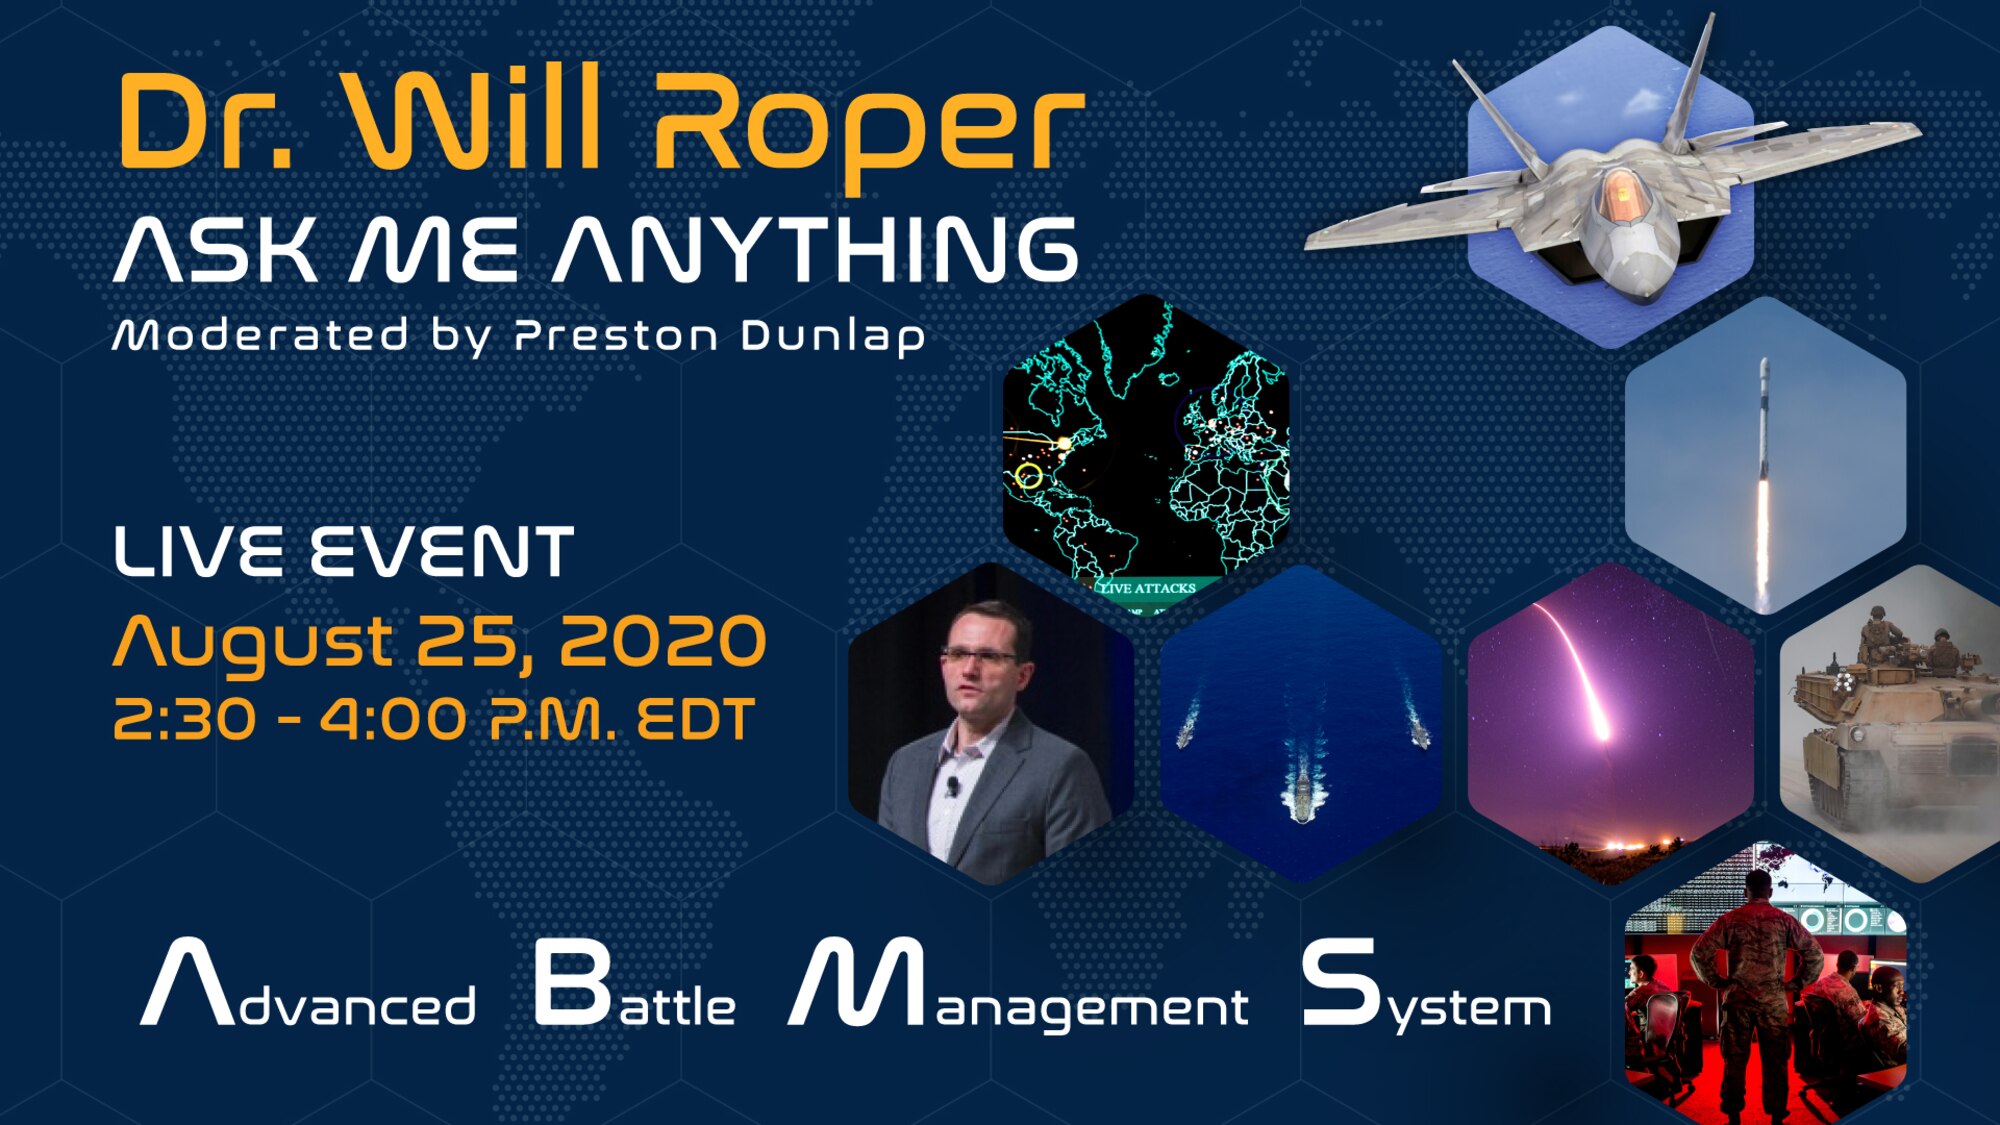 Dr. Will Roper, Assistant Secretary of the Air Force for acquisition, technology and logistics and Preston Dunlap, Department of the Air Force chief architect, will host an “Ask Me Anything” live Q&A event, August 25, 2020 from 2:30 p.m. to 4 p.m. about the  Advanced Battle Management System. The goal of ABMS is to enable the Air Force and Space Force to operate together and as part of a joint team – connecting sensors, decision makers and weapons through a secure data network enabling rapid decision making and all-domain command and control. (U.S. Air Force Graphic by Rosario "Charo" Gutierrez)